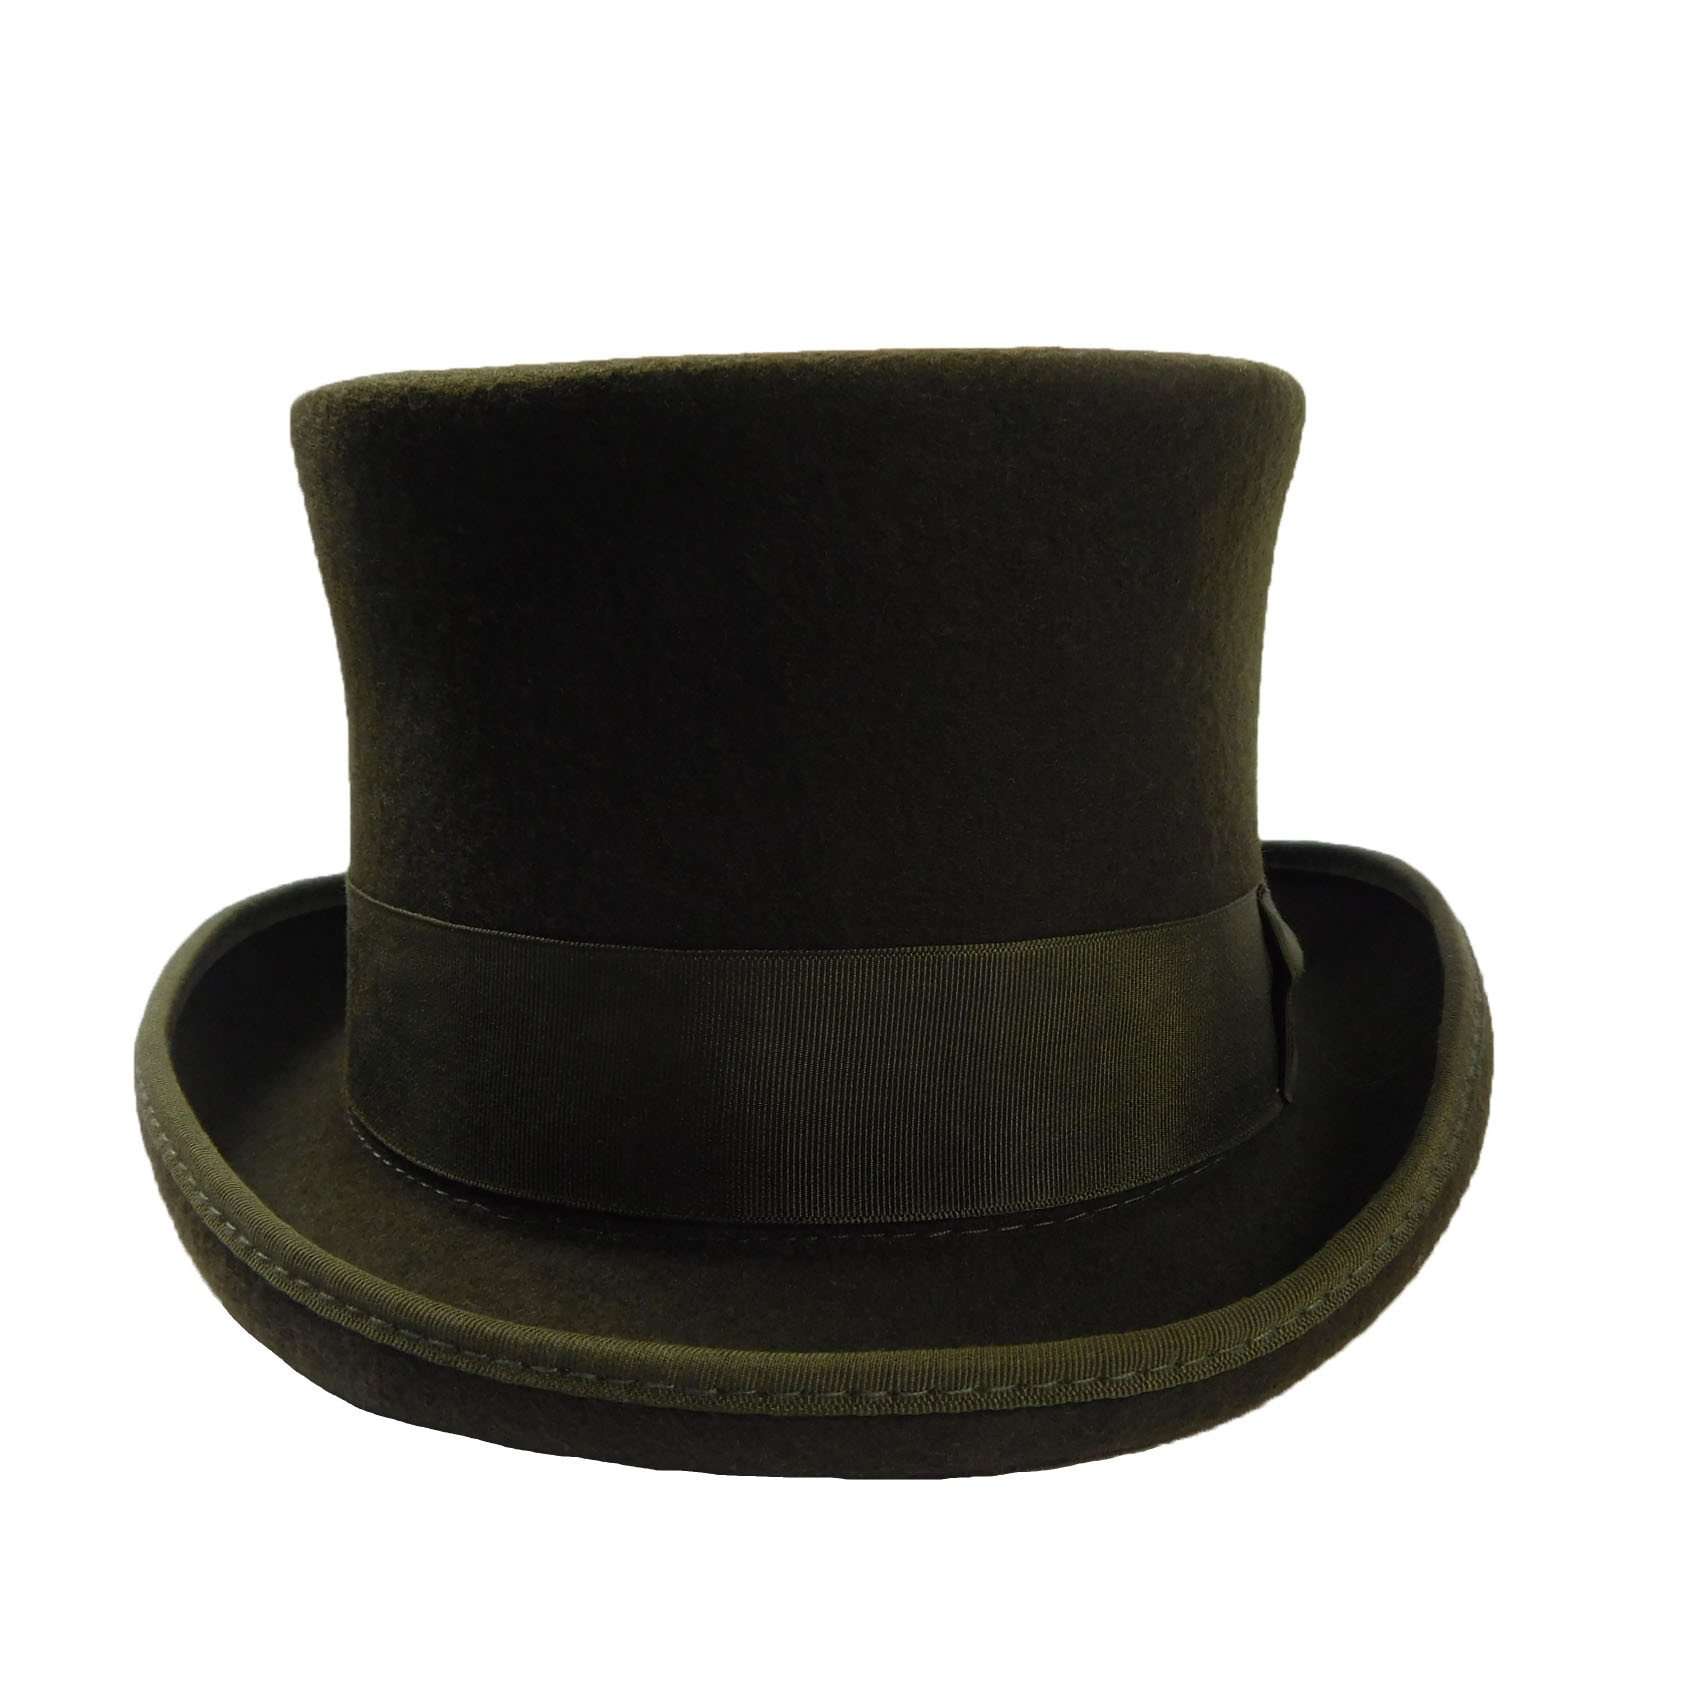 Classic Tall Olive Wool Felt Top Hat by JSA for Men Top Hat Jeanne Simmons js6808OLM Olive M 